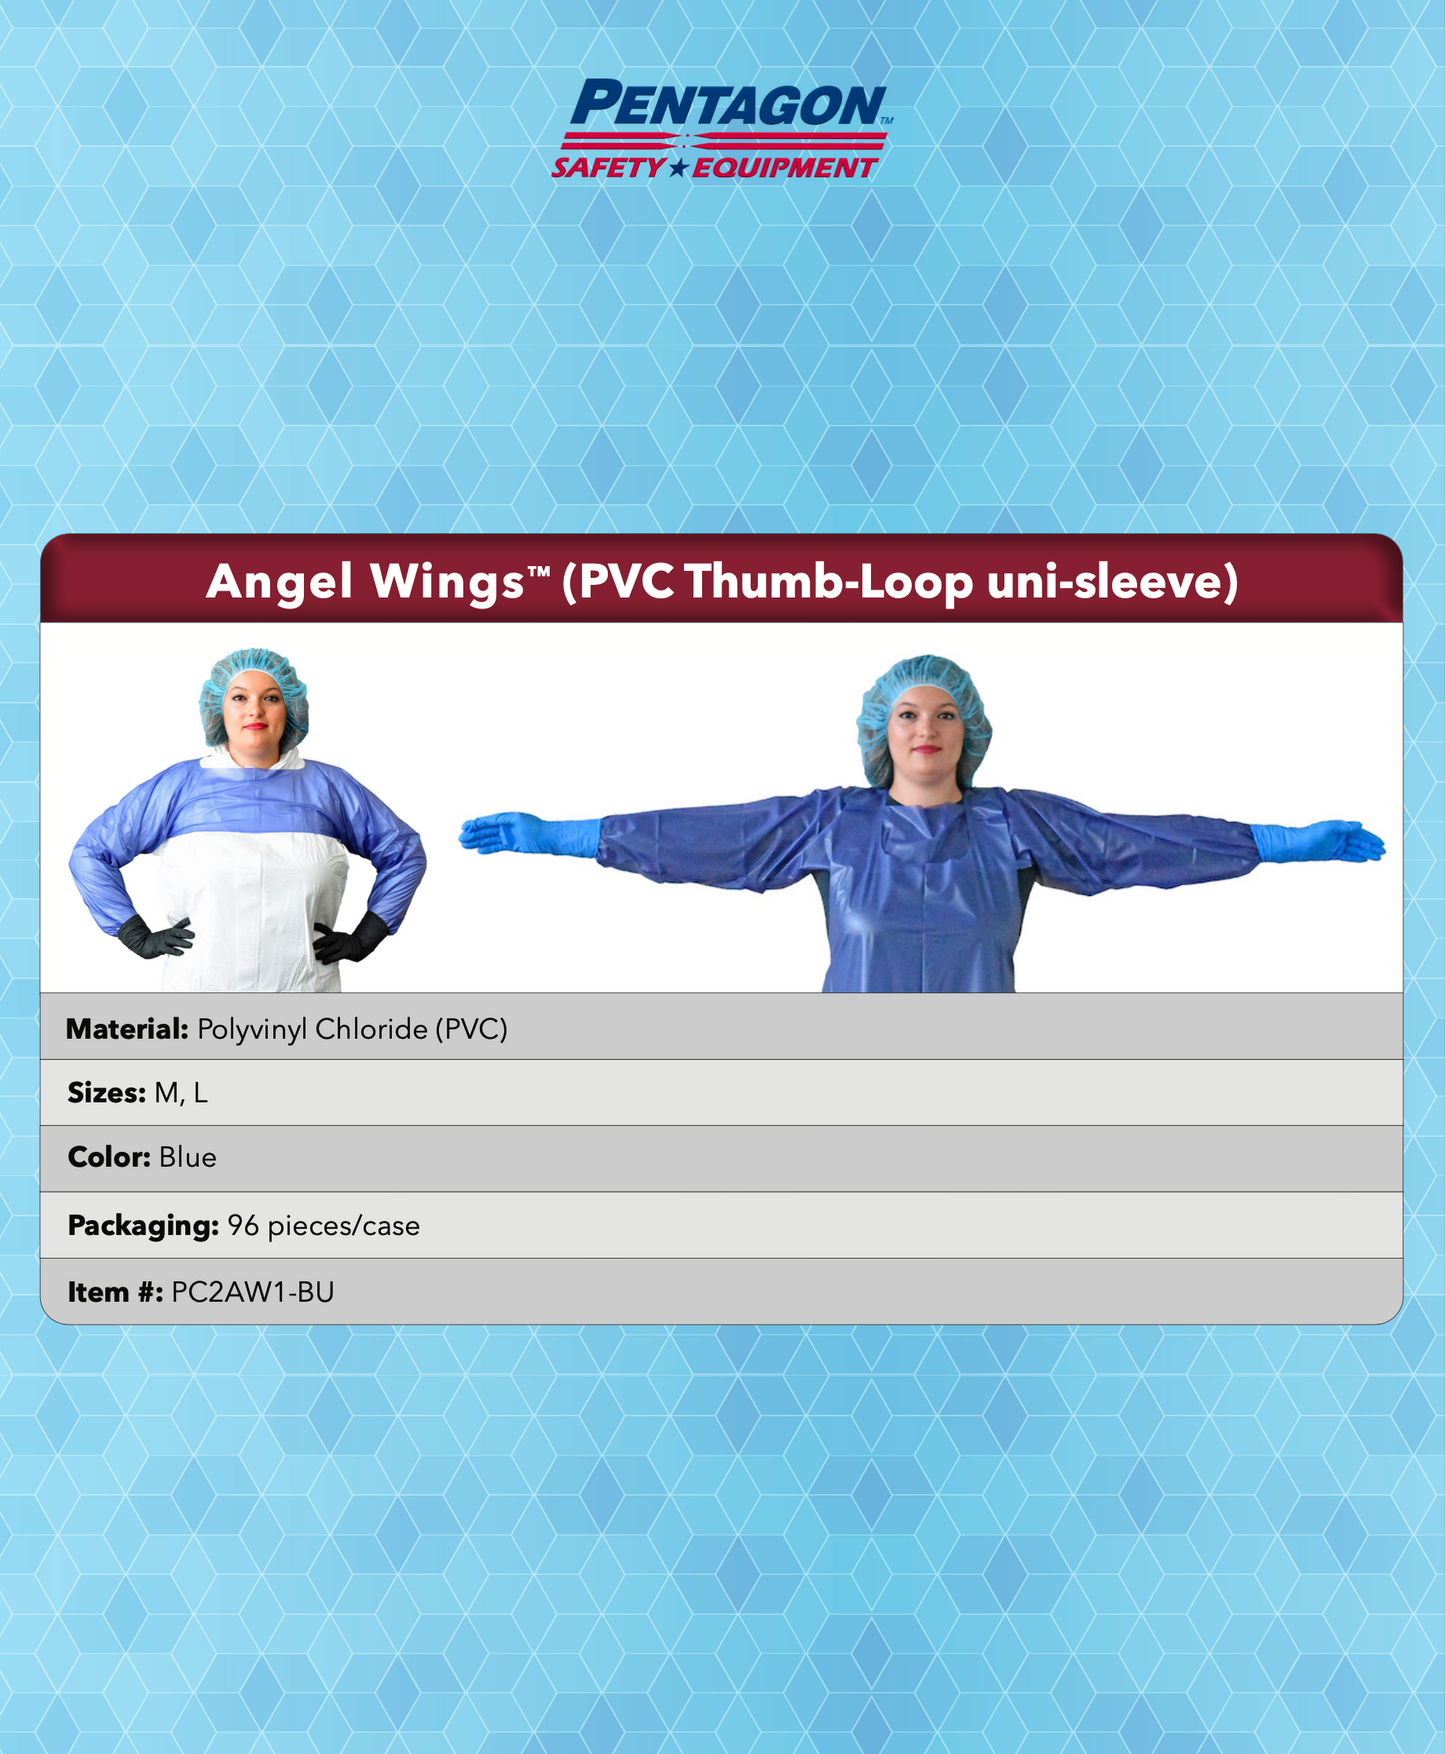 96 pcs - Angel Wings™ - Disposable PVC Thumb-Loop Uni-Sleeve, Protects Arms From Chemicals